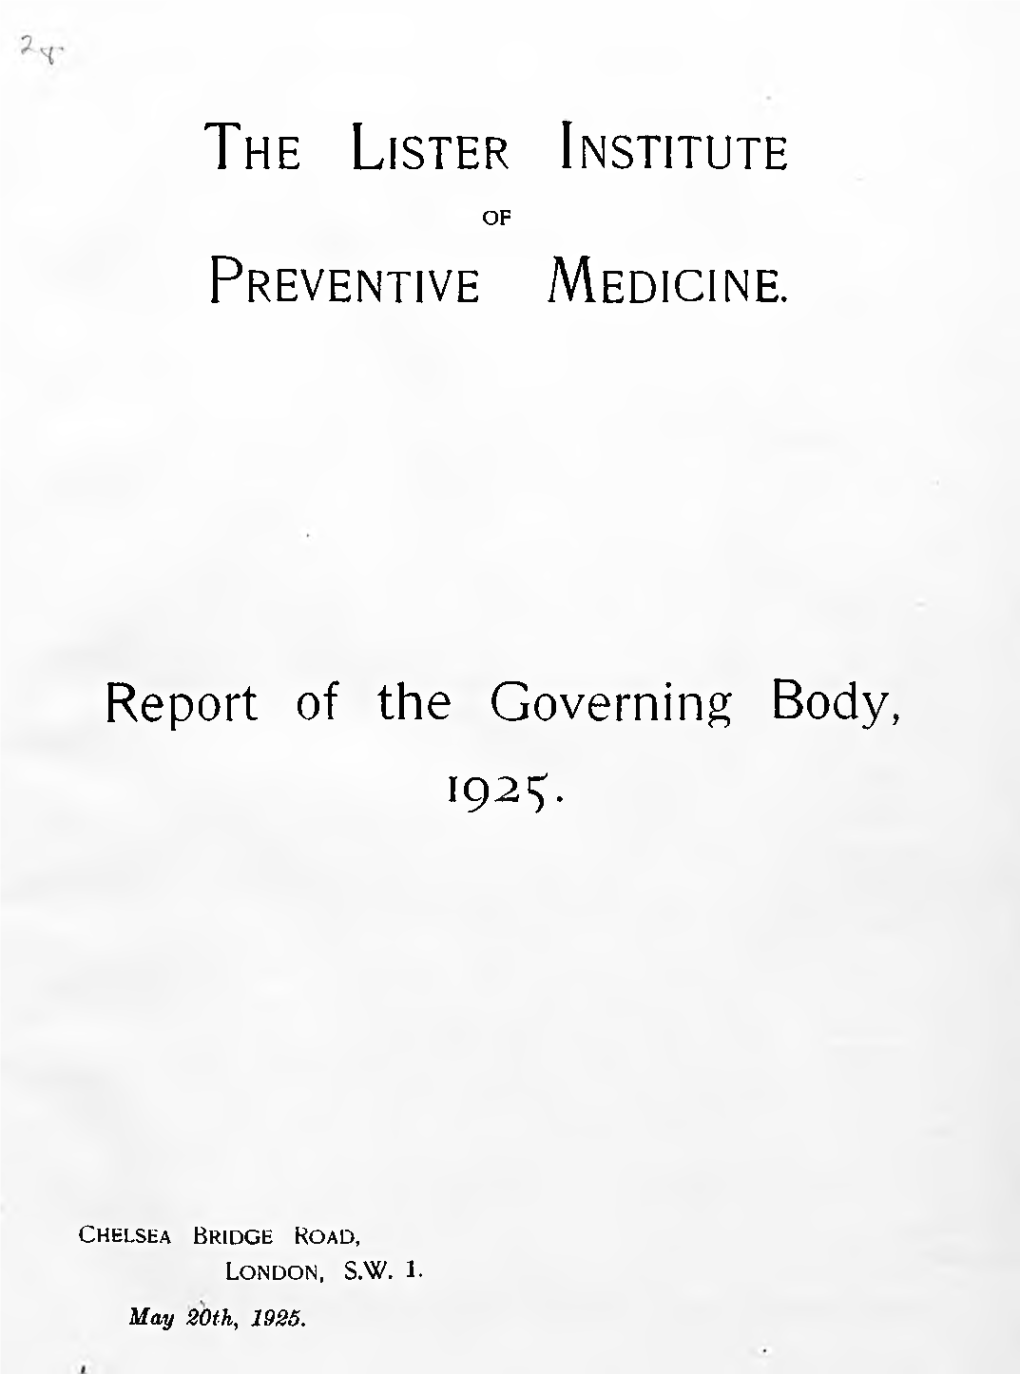 1925 to 1934 Lister Annual Report and Accounts